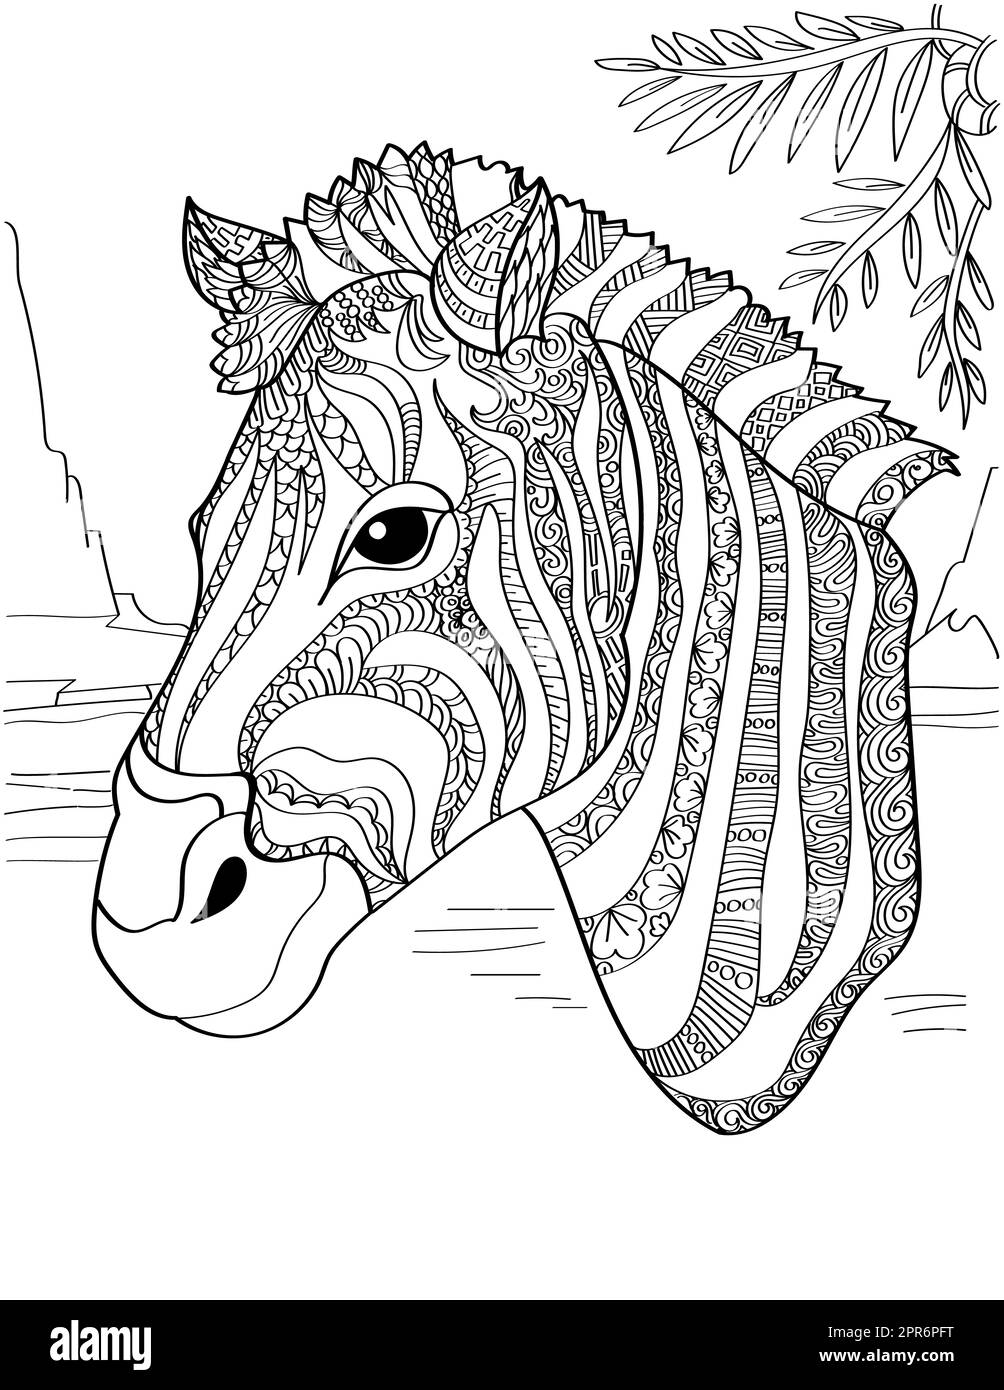 Zebra Head Facing Sideward With Leaves Above Colorless Line Drawing. Stock Photo